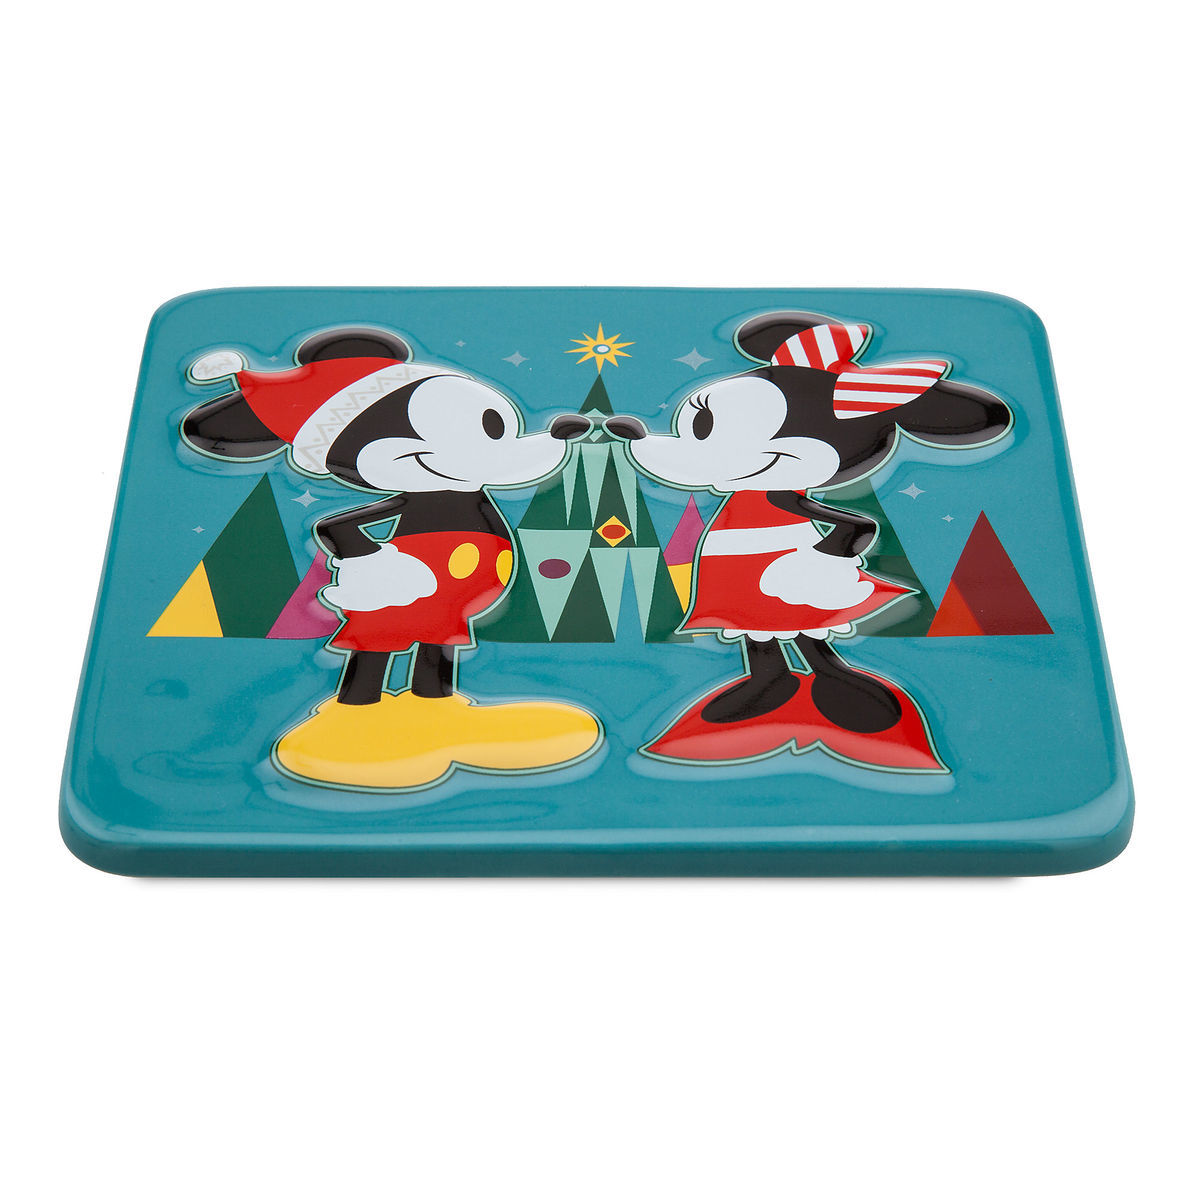 Disney Chear Mickey and Minnie Mouse Holiday Trivet New